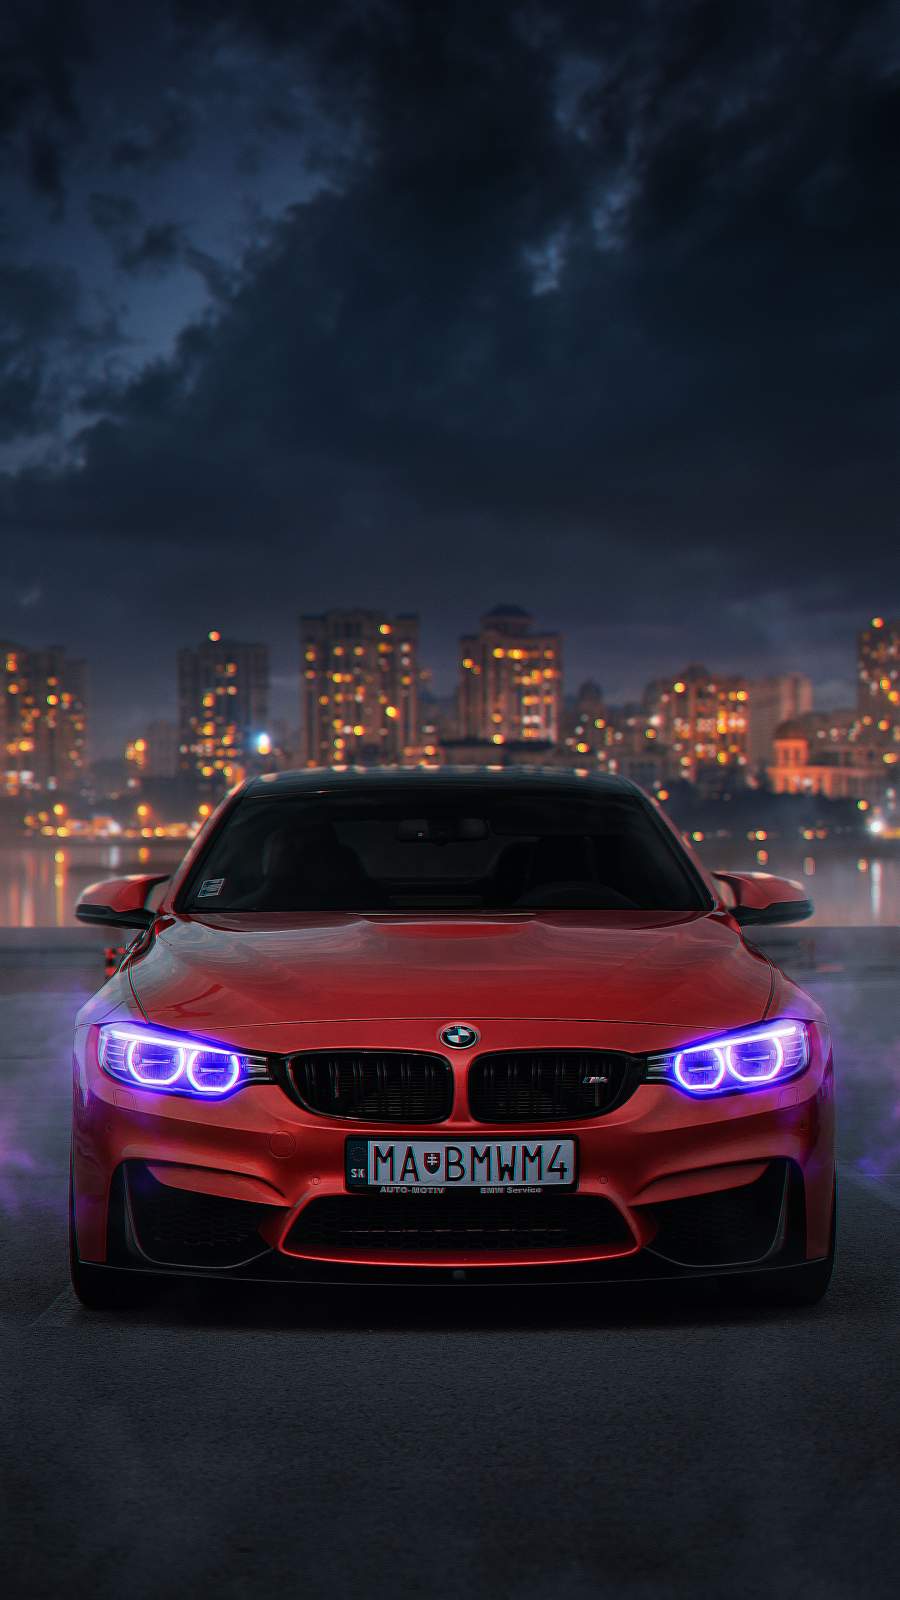 BMW Car Wallpaper - IPhone Wallpapers : iPhone Wallpapers